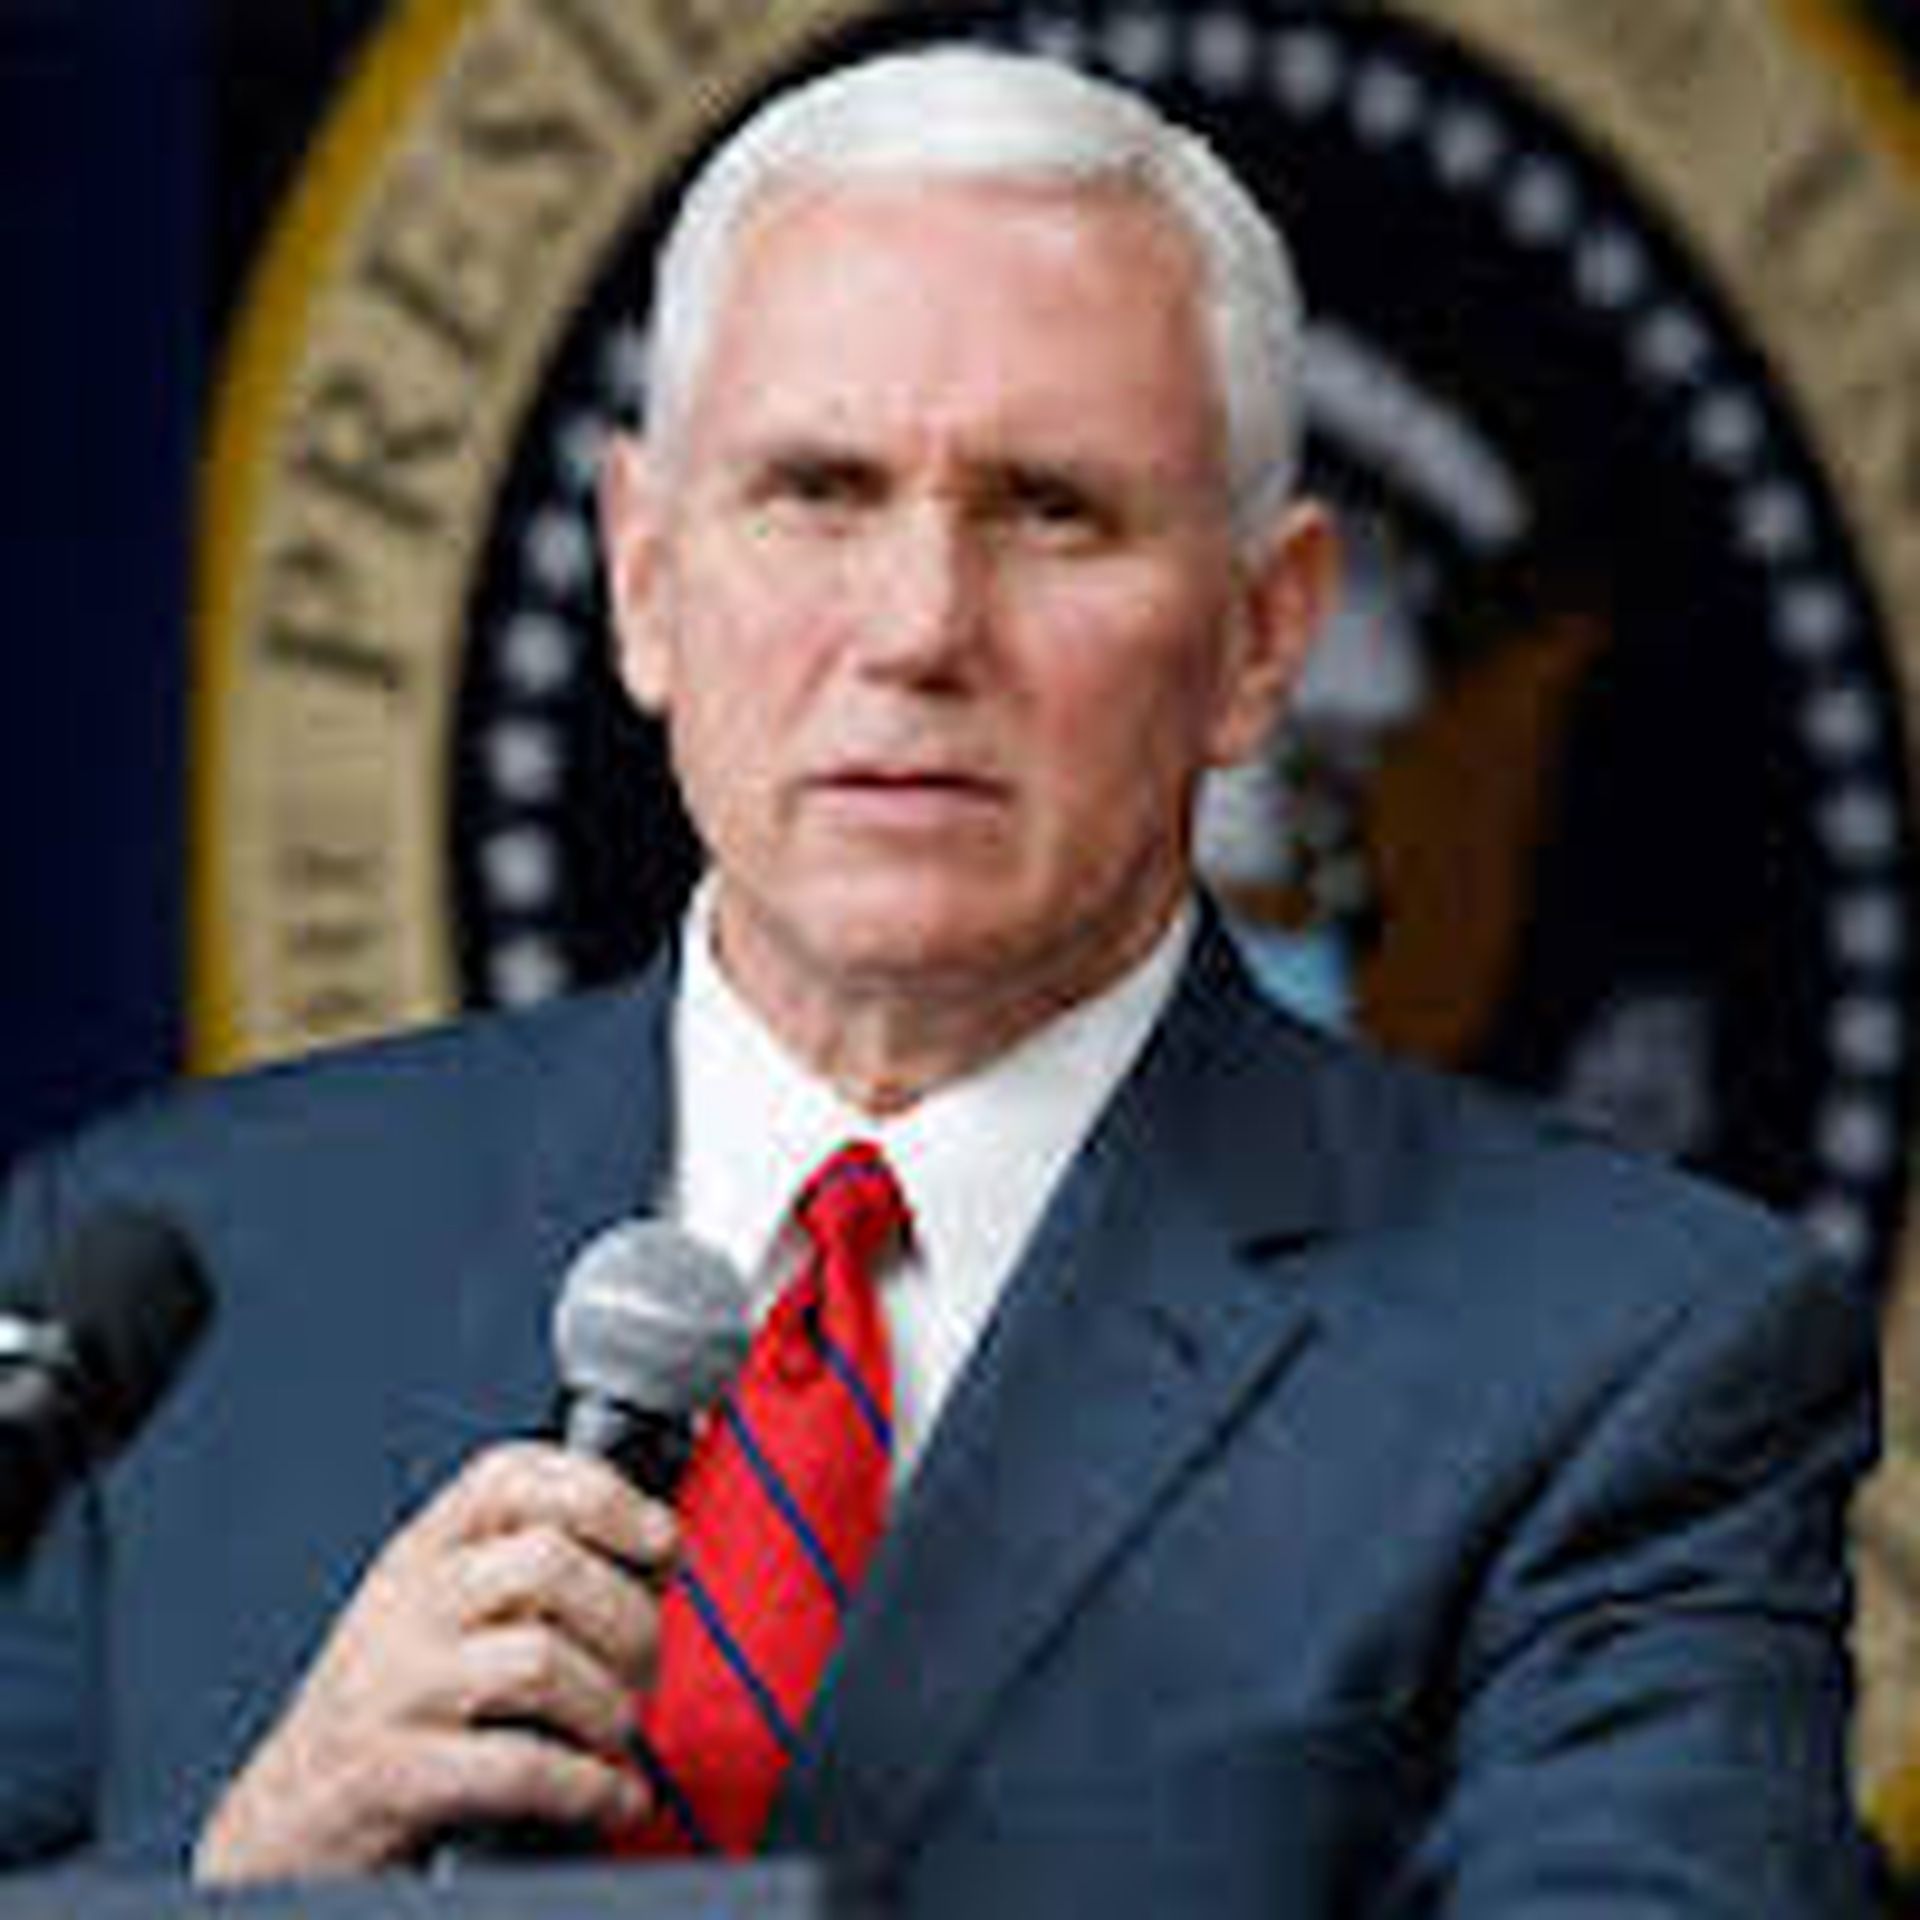 VP Mike Pence has tested negative for COVID-19.